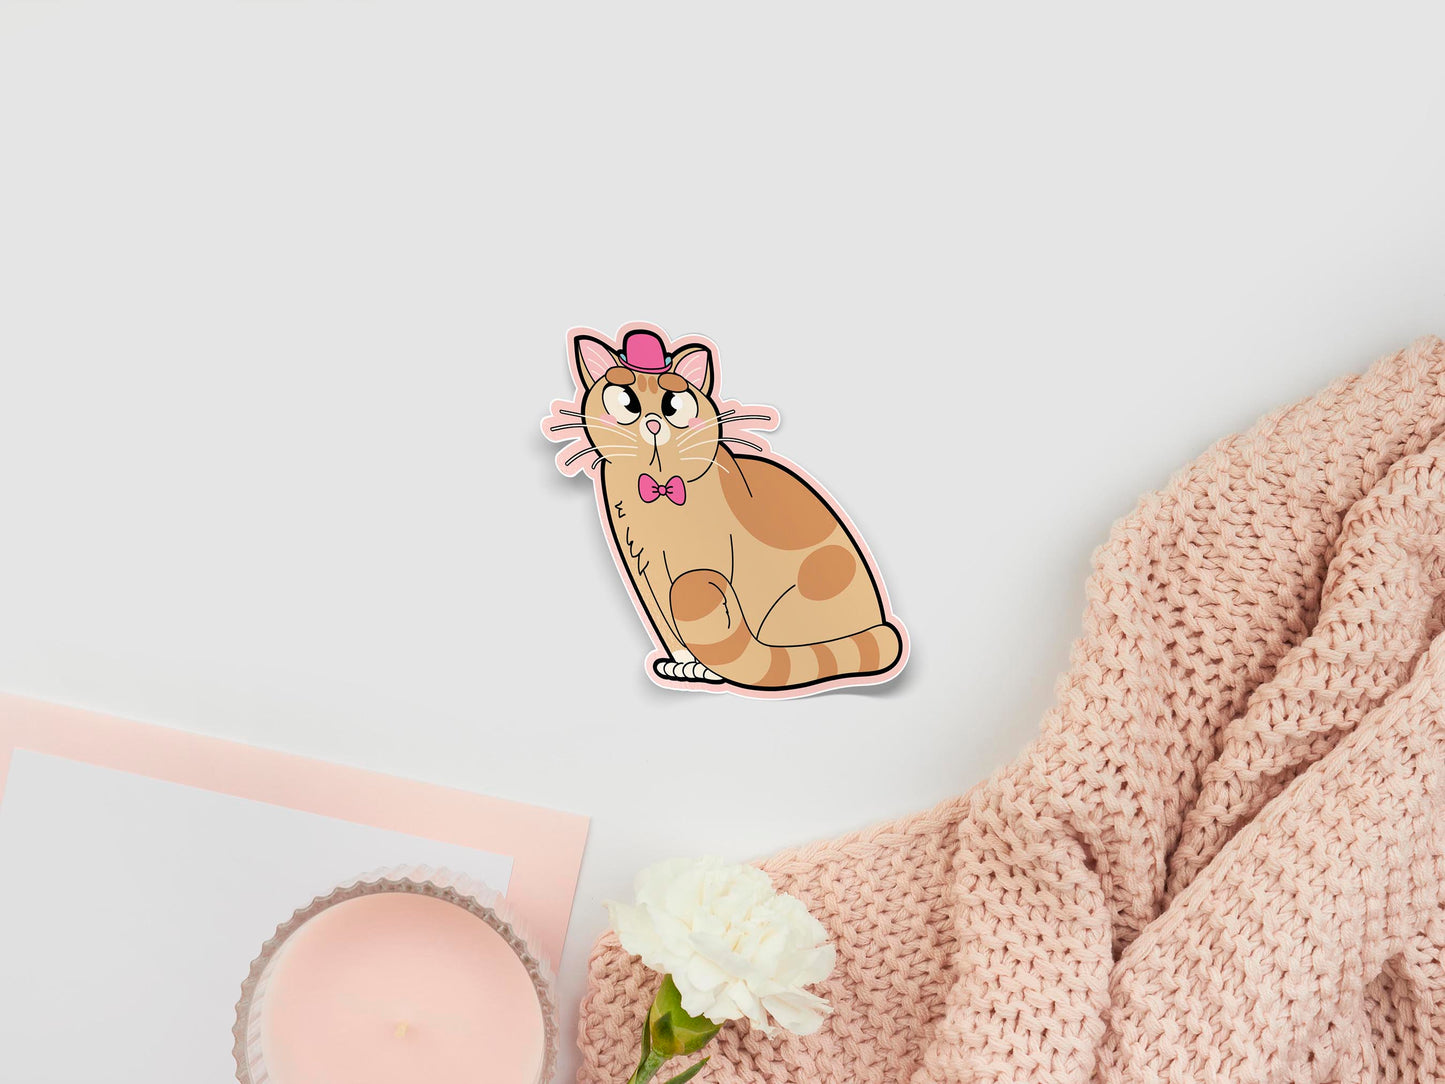 Large sticker of digital illustration cartoon of a cute ginger cat with crossed eyes in a pink bowler hat and bow tie